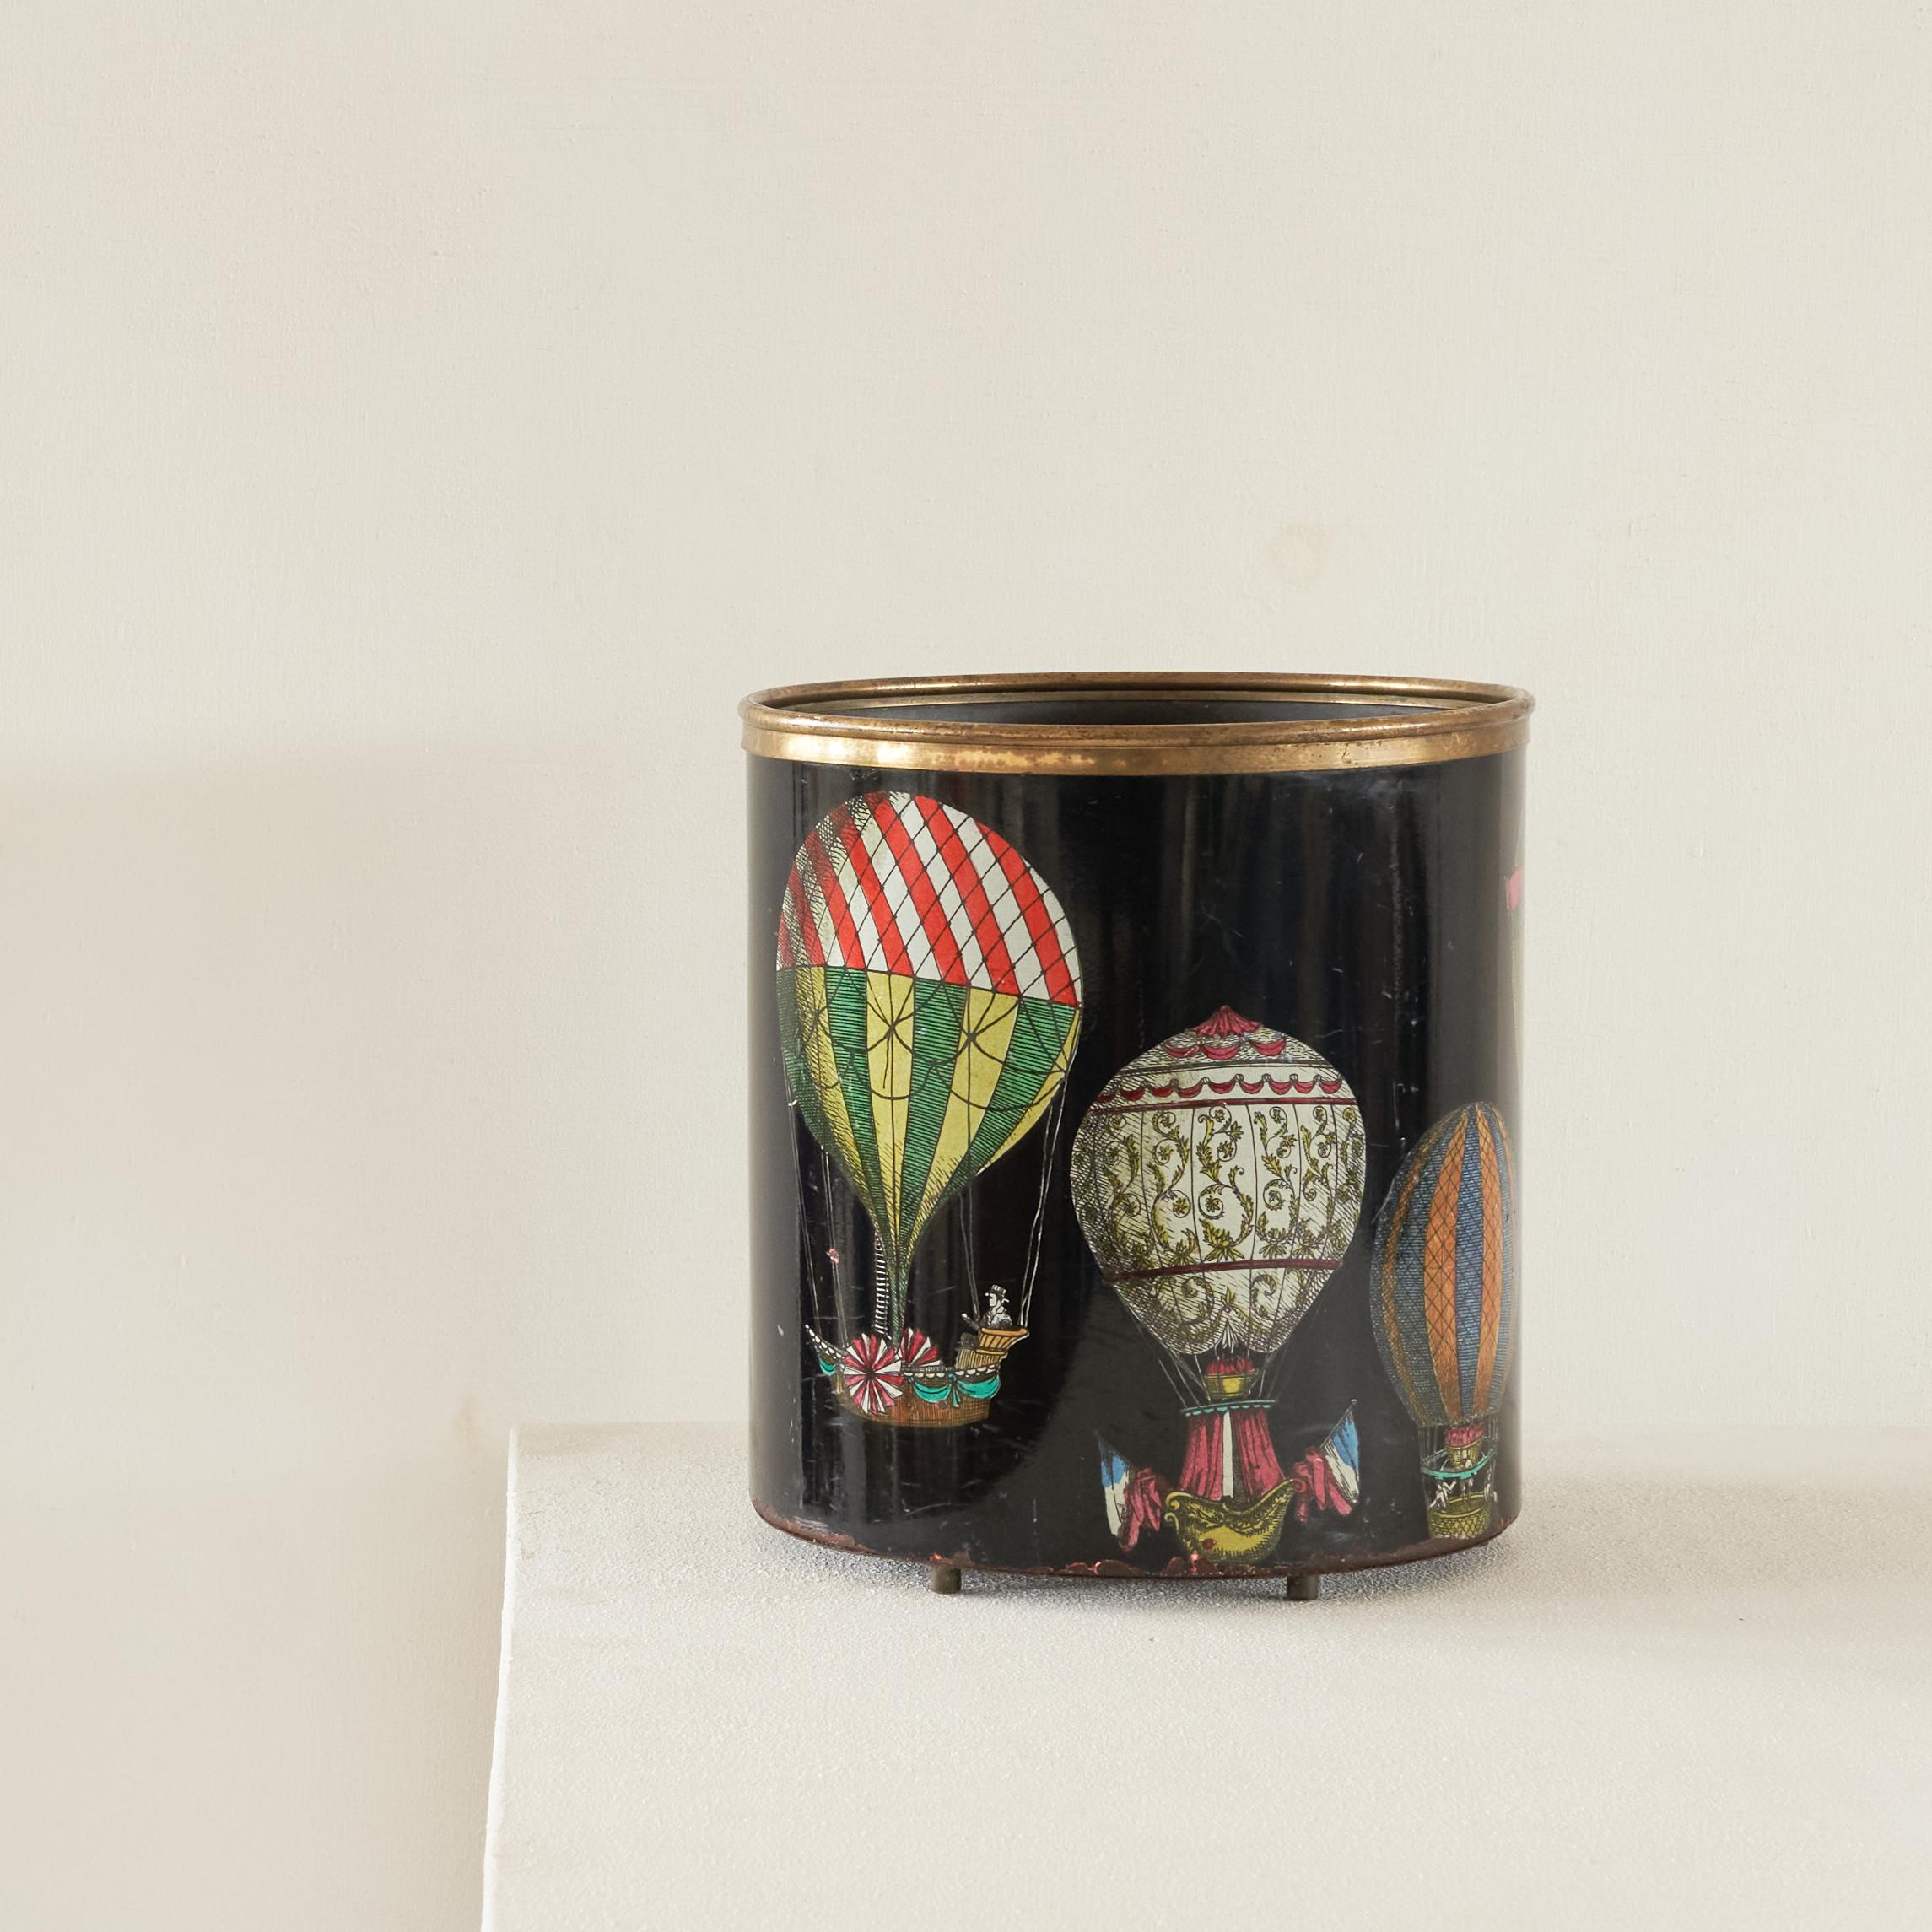 Piero Fornasetti Rare Vintage 'Mongolfiere' Waste Paper Basket, Milan, Italy, 1960s.

This is a very rare original 1960s Piero Fornasetti waste paper basket / bin with the famous hot air balloons - the 'Mongolfiere' design by famous Italian artist